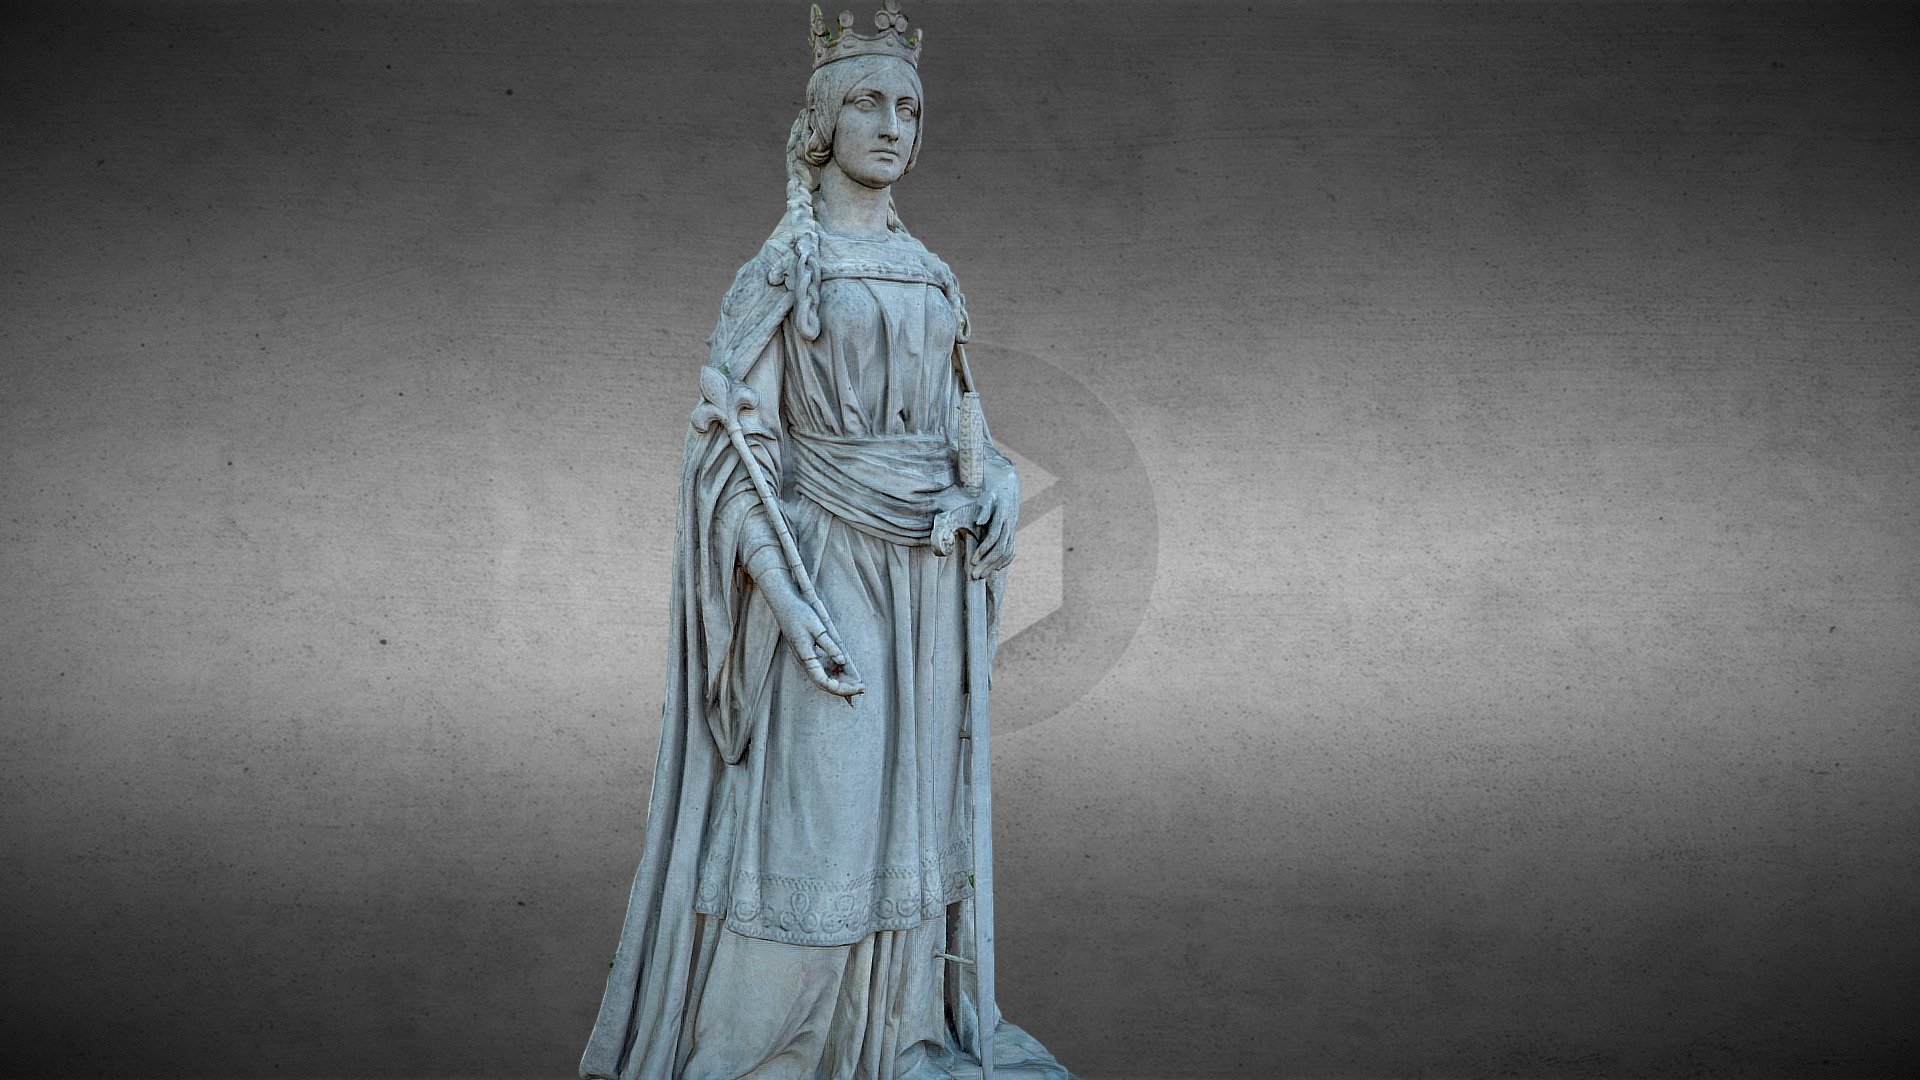 Queen Mathilde, spouse of Guillaume le conquérant, historical character of history of France and England.

She is holding a sceptre with a fleur-de-lys, royal symbol of power, and a sword in her other hand.

Statue made by the french sculptor Jean-Jacques Elshoecht (1797-1856) and located in Luxembourg garden, Paris 3d model